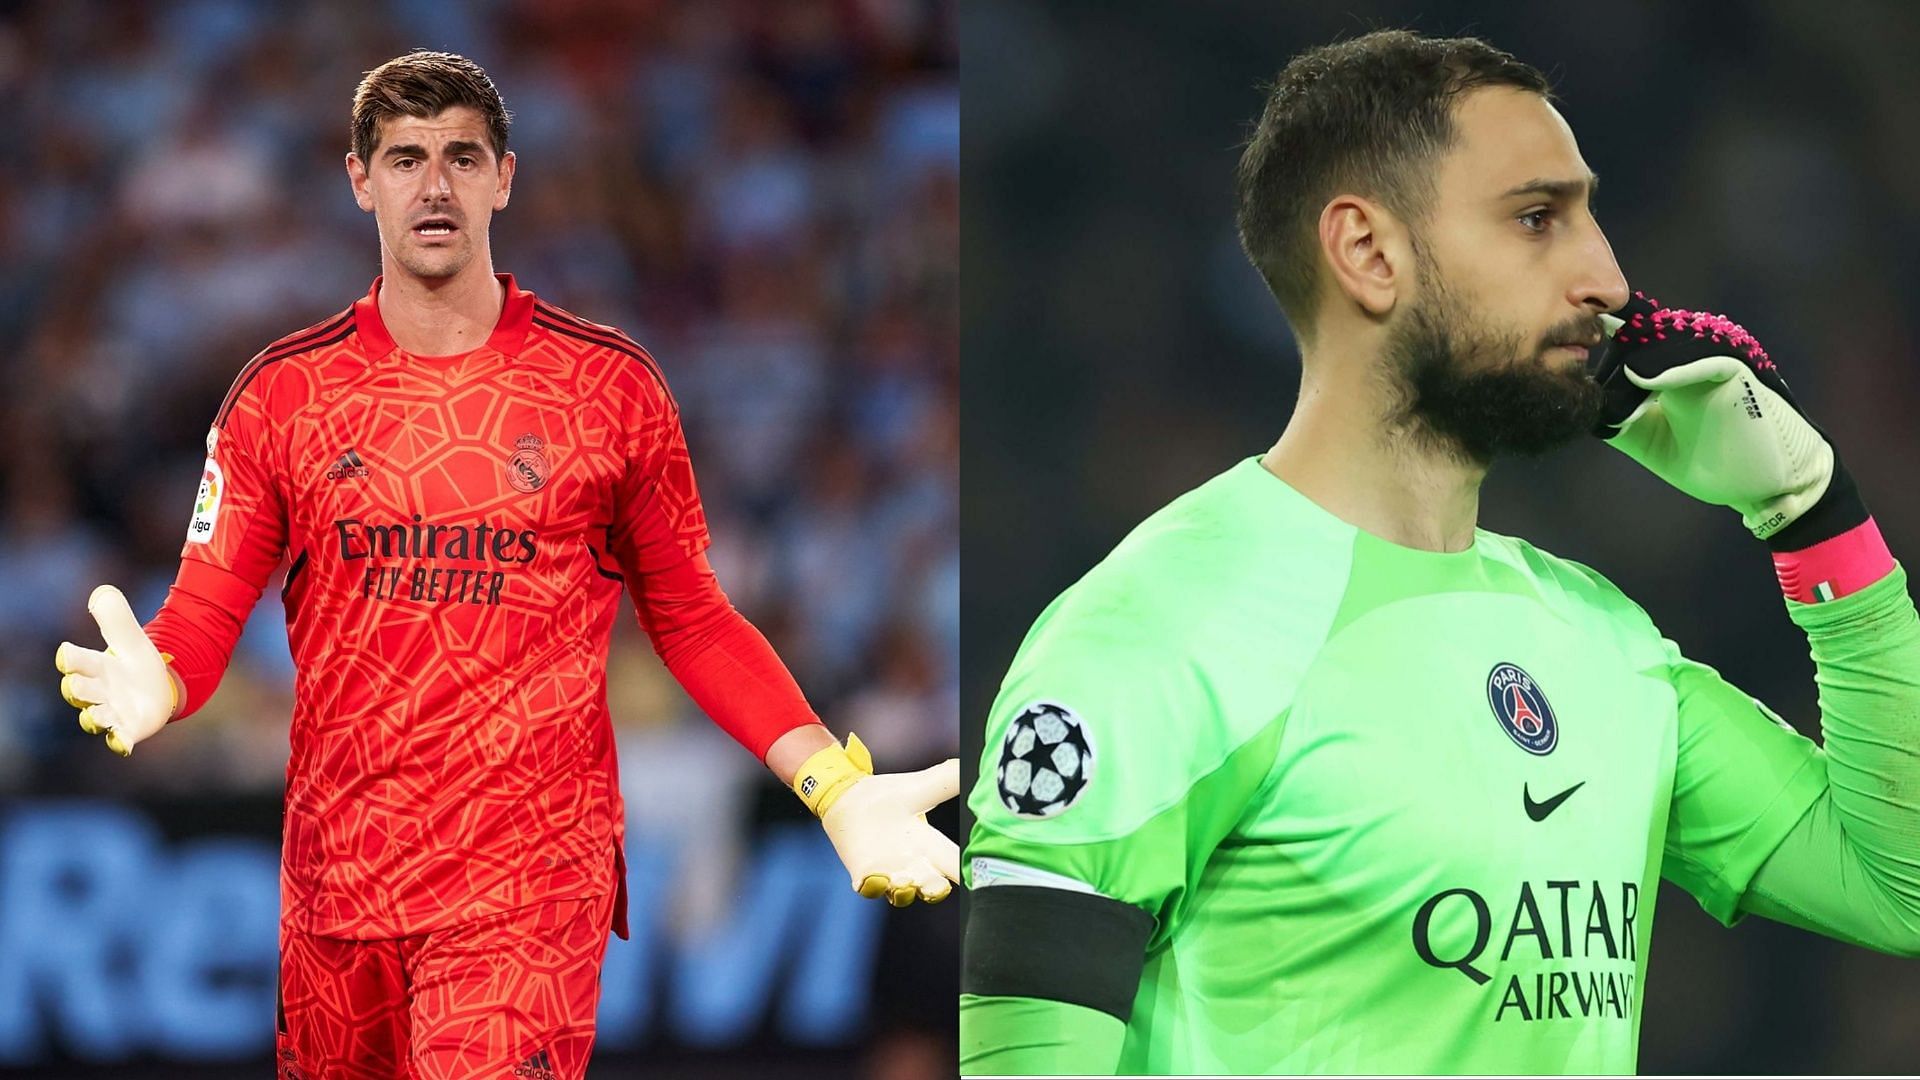 Courtois and Donnarumma are among the best goalkeepers in FIFA 23 career mode (Images via Goal)